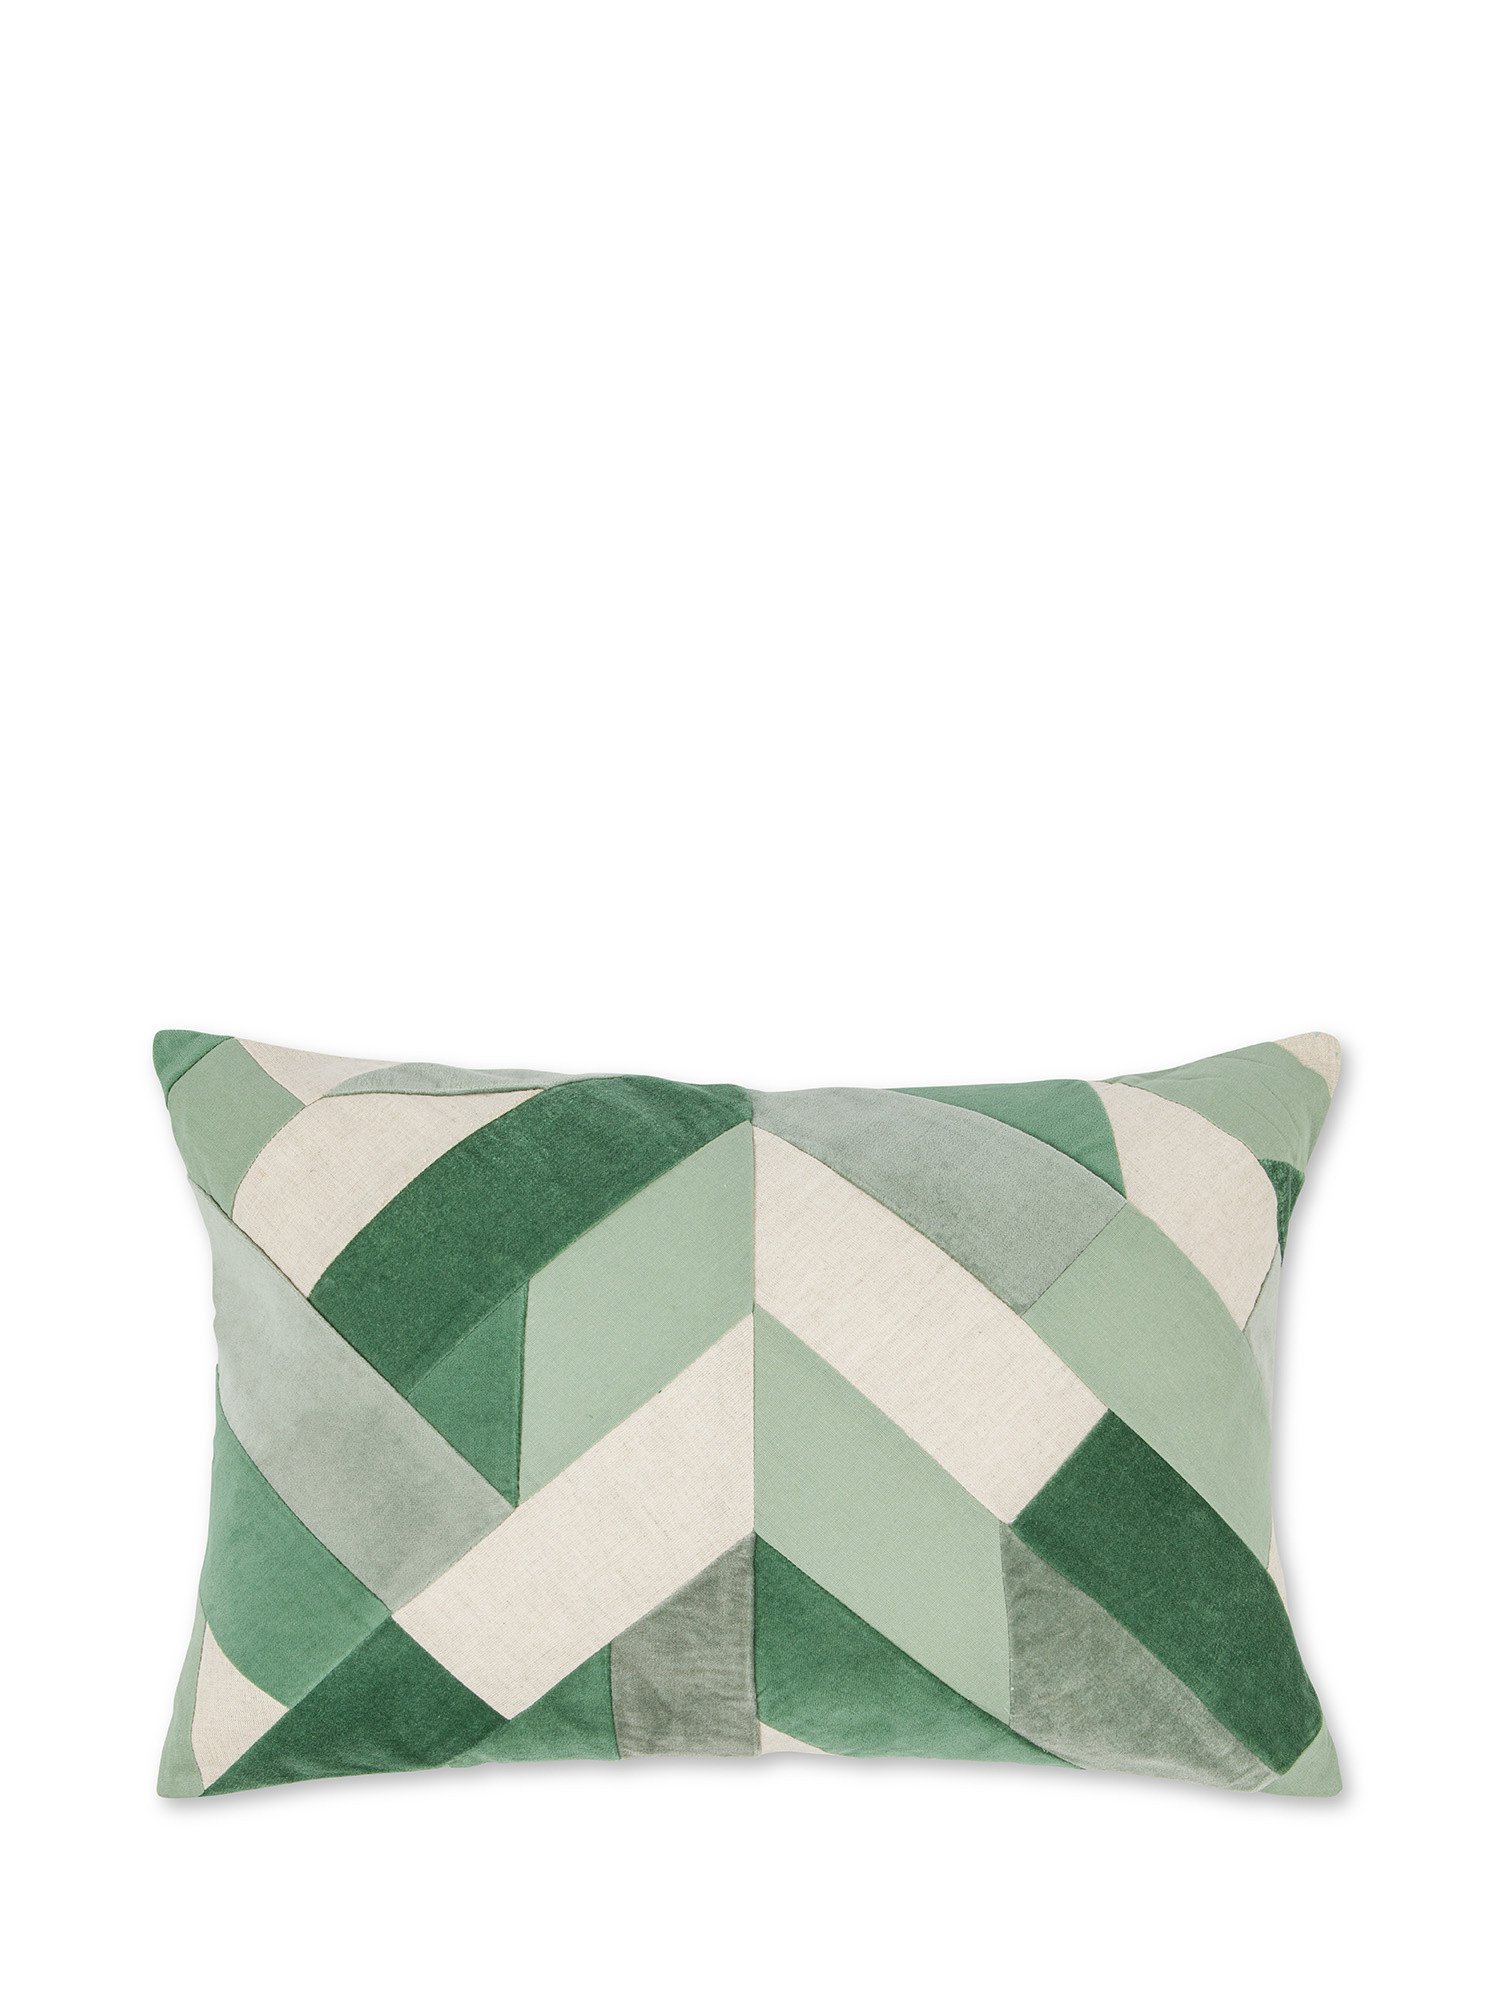 Patchwork cushion mix canvas and velvet geometric patterns 35X50cm, Green, large image number 0